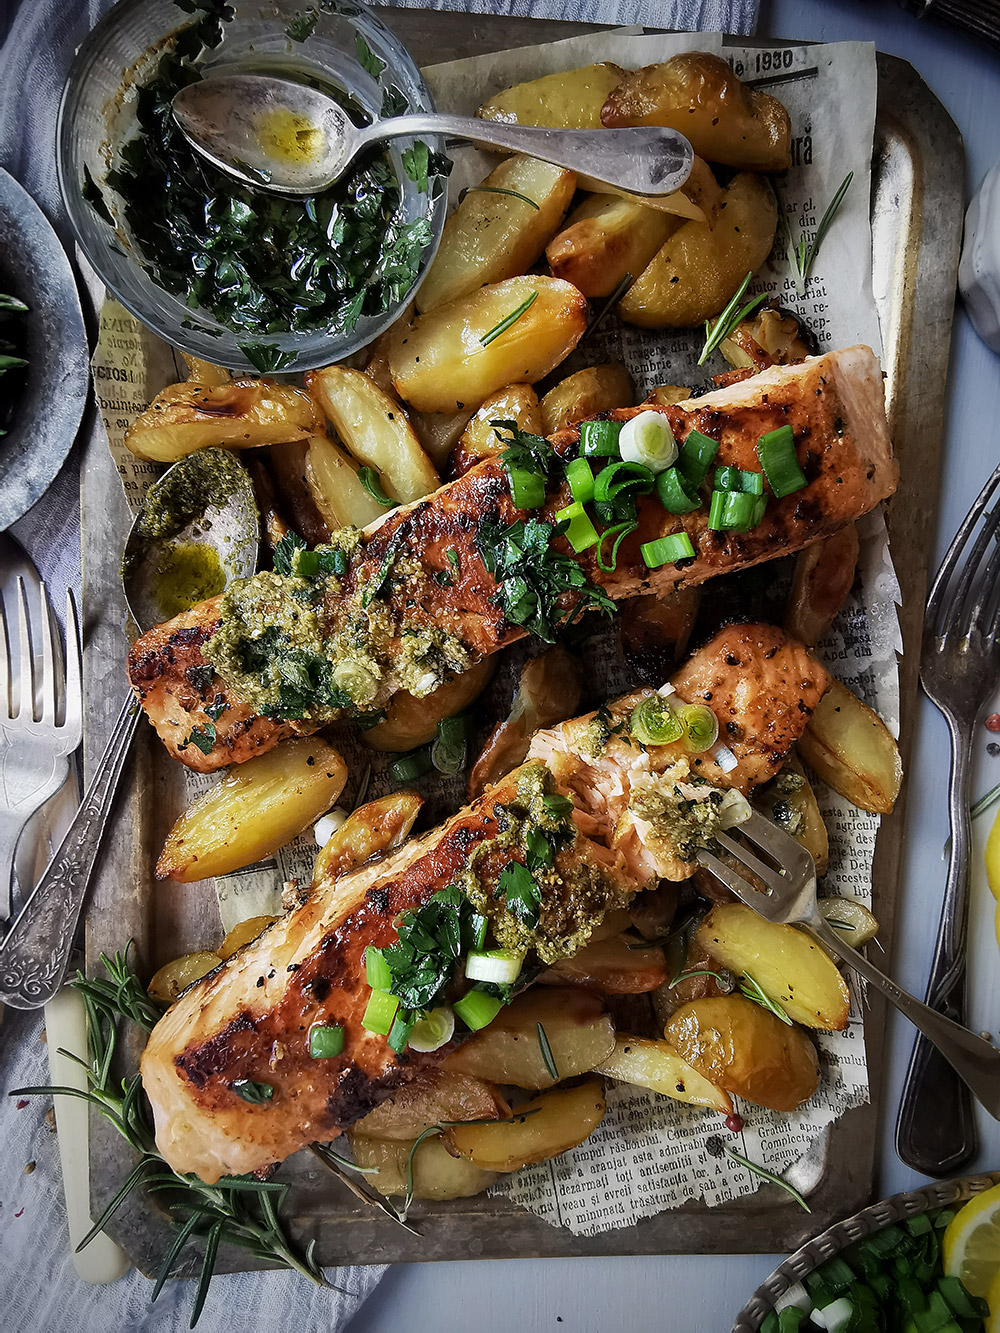 Roasted salmon and baby potatoes